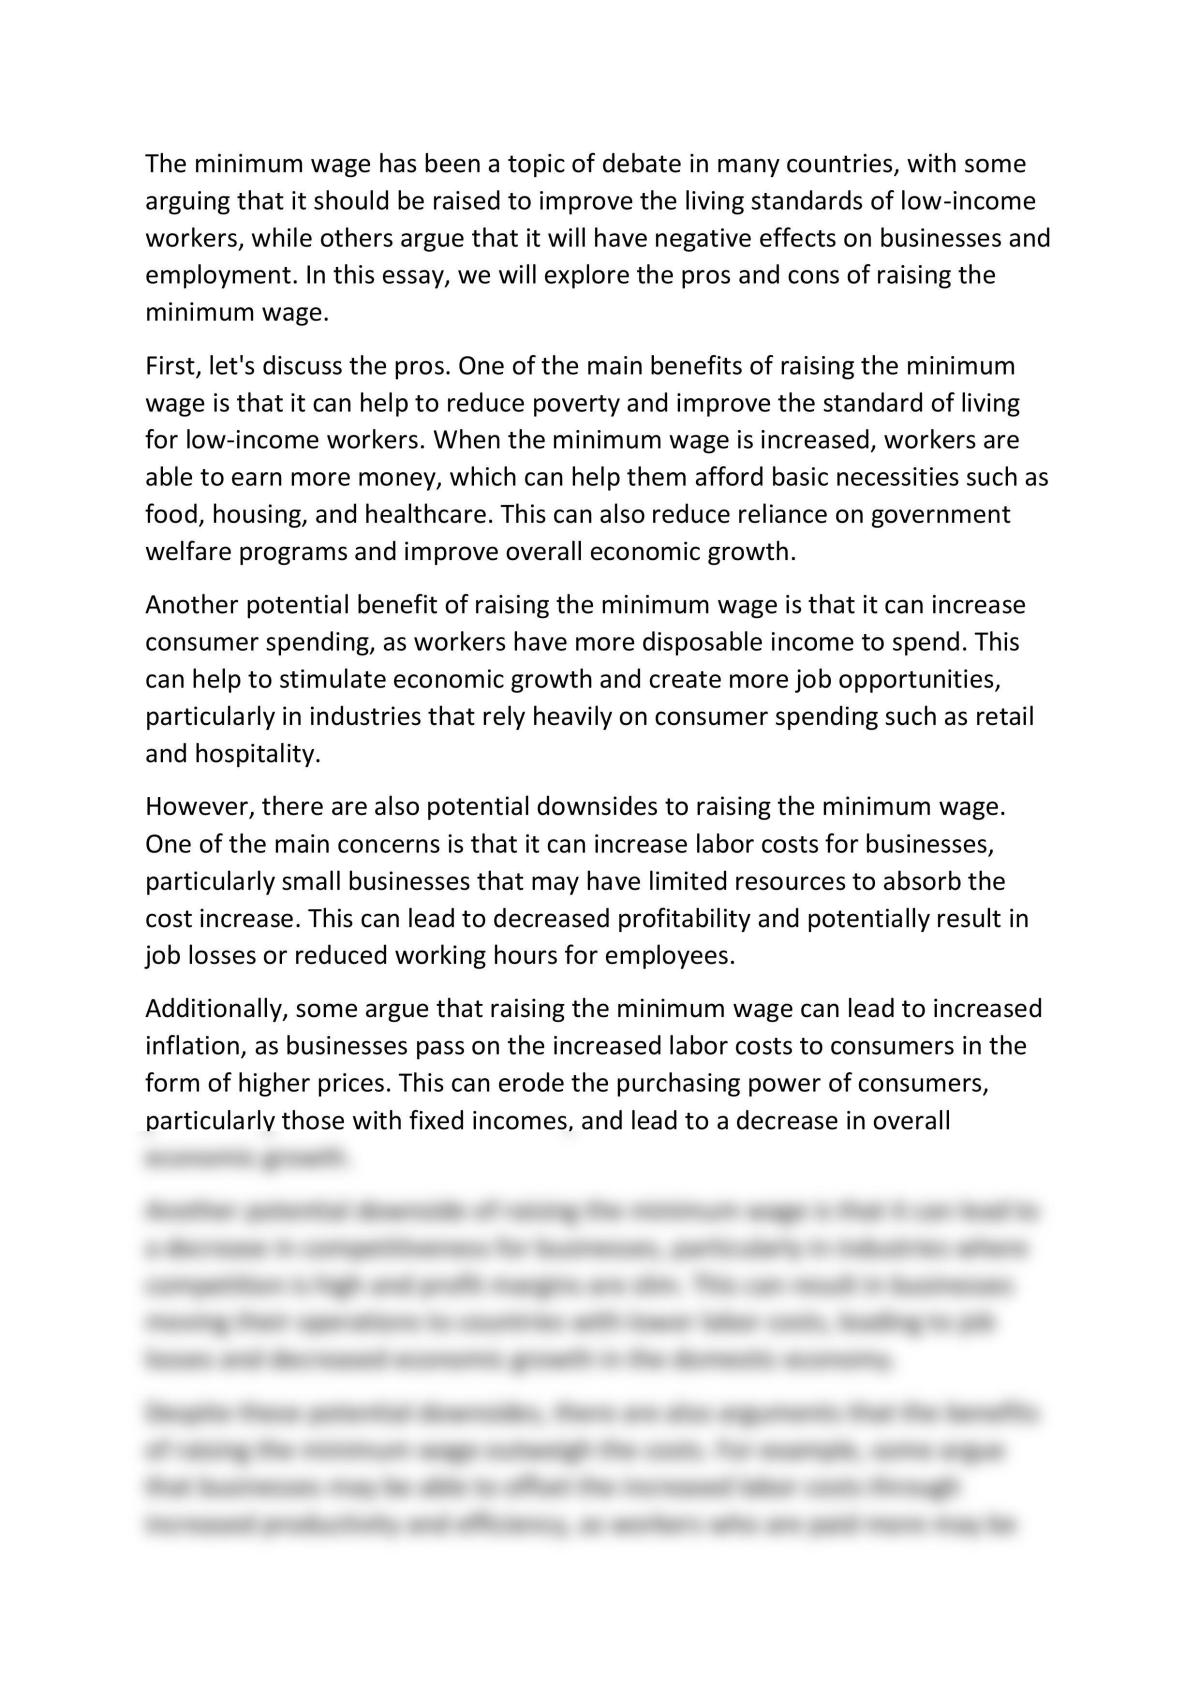 Positive and negative impacts of the introduction of a minimum wage - Page 1